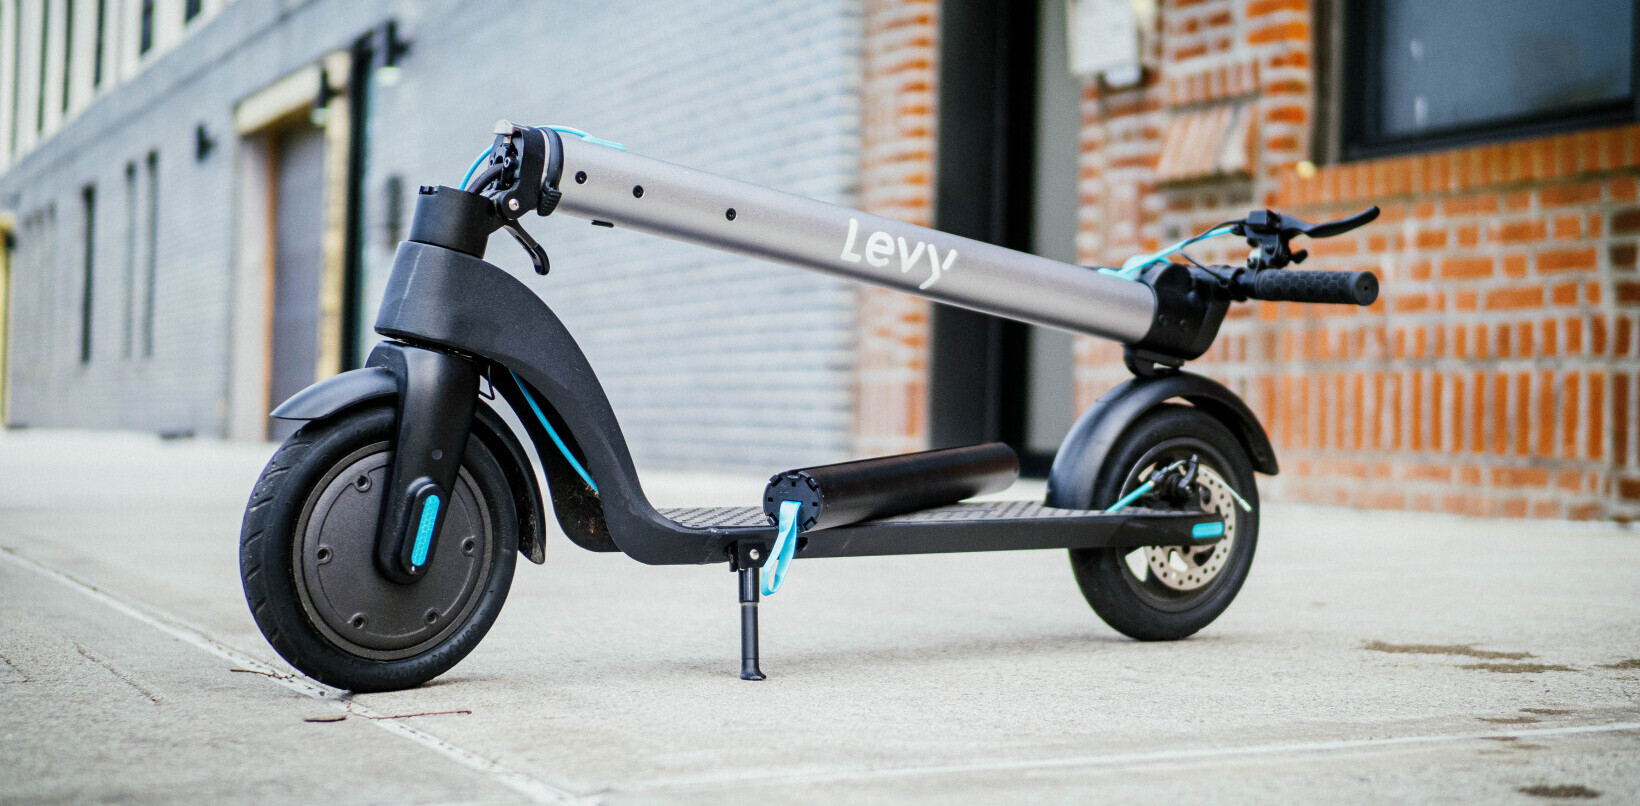 Review: The Levy electric scooter packs swappable batteries and thoughtful design for $499